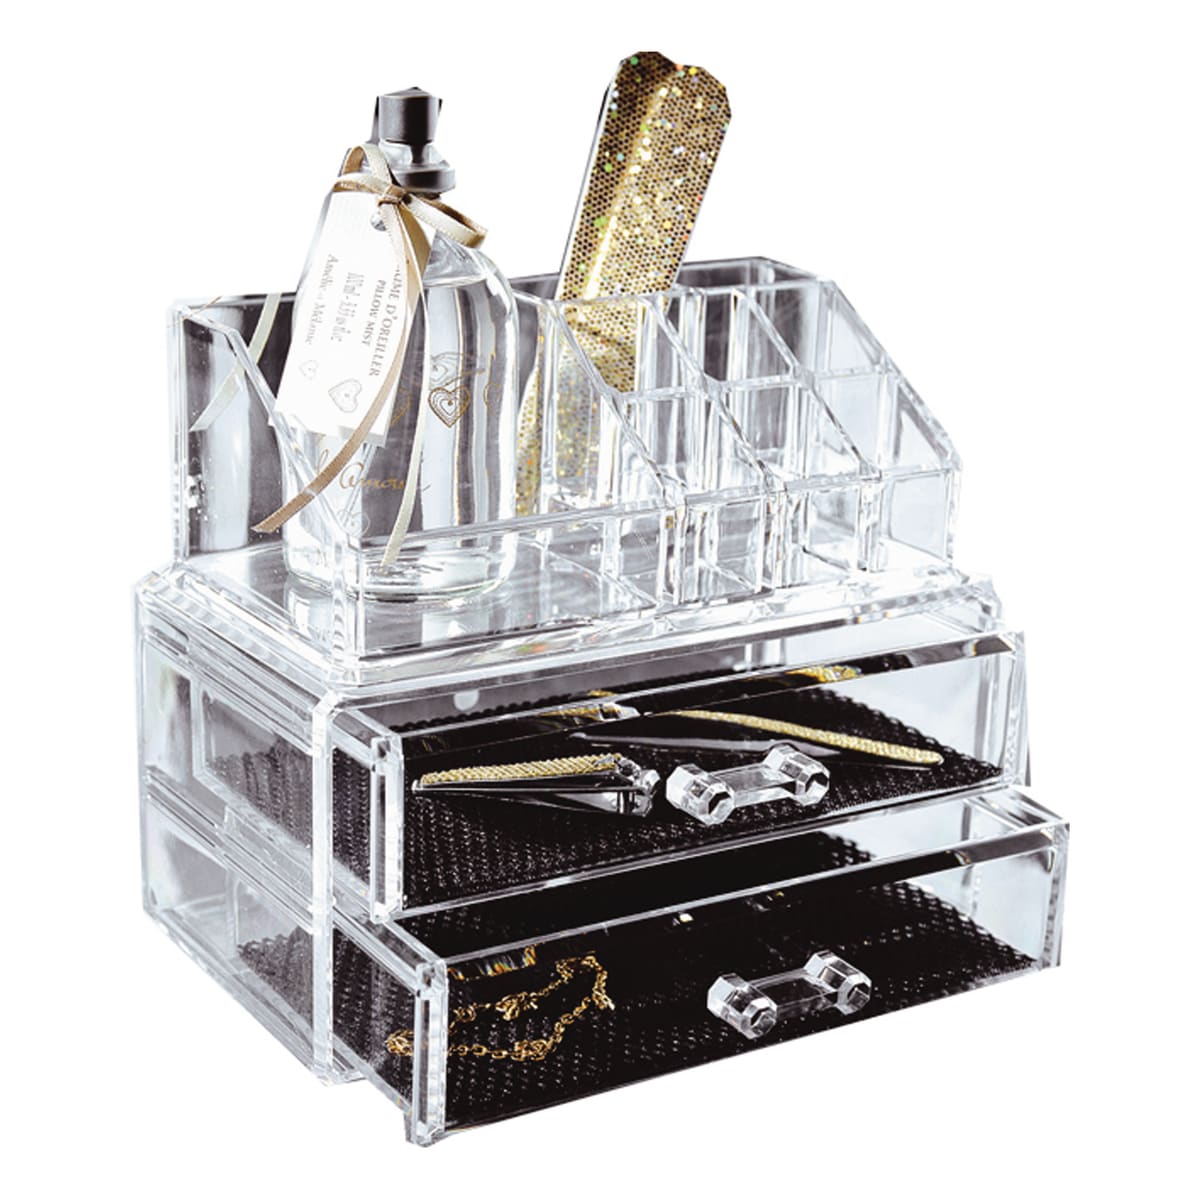 COSMETICS ORGANISER WITH 2 DRAWERS W18.8 D 11.7 H 15.8 CM